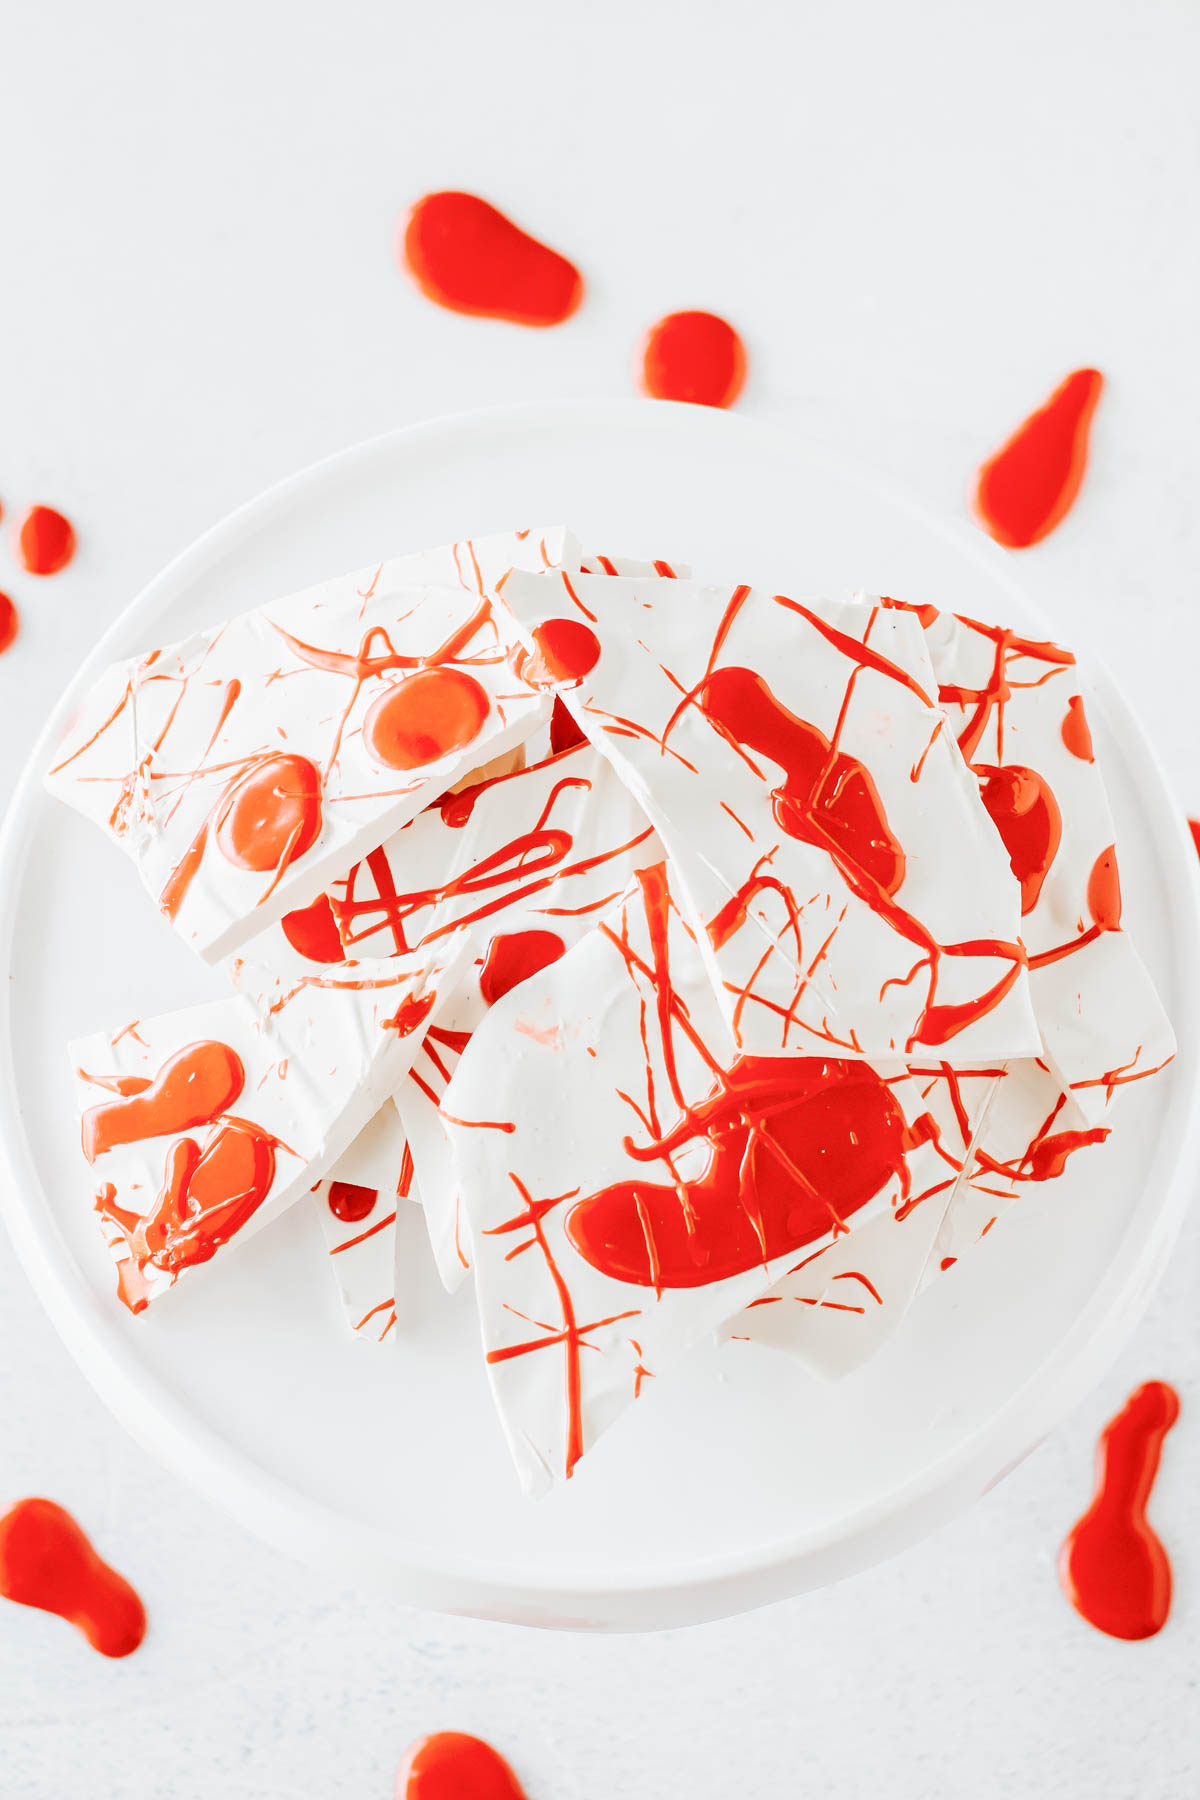 A white plate stacked with white chocolate bark pieces decorated with red icing to look like blood for Halloween.